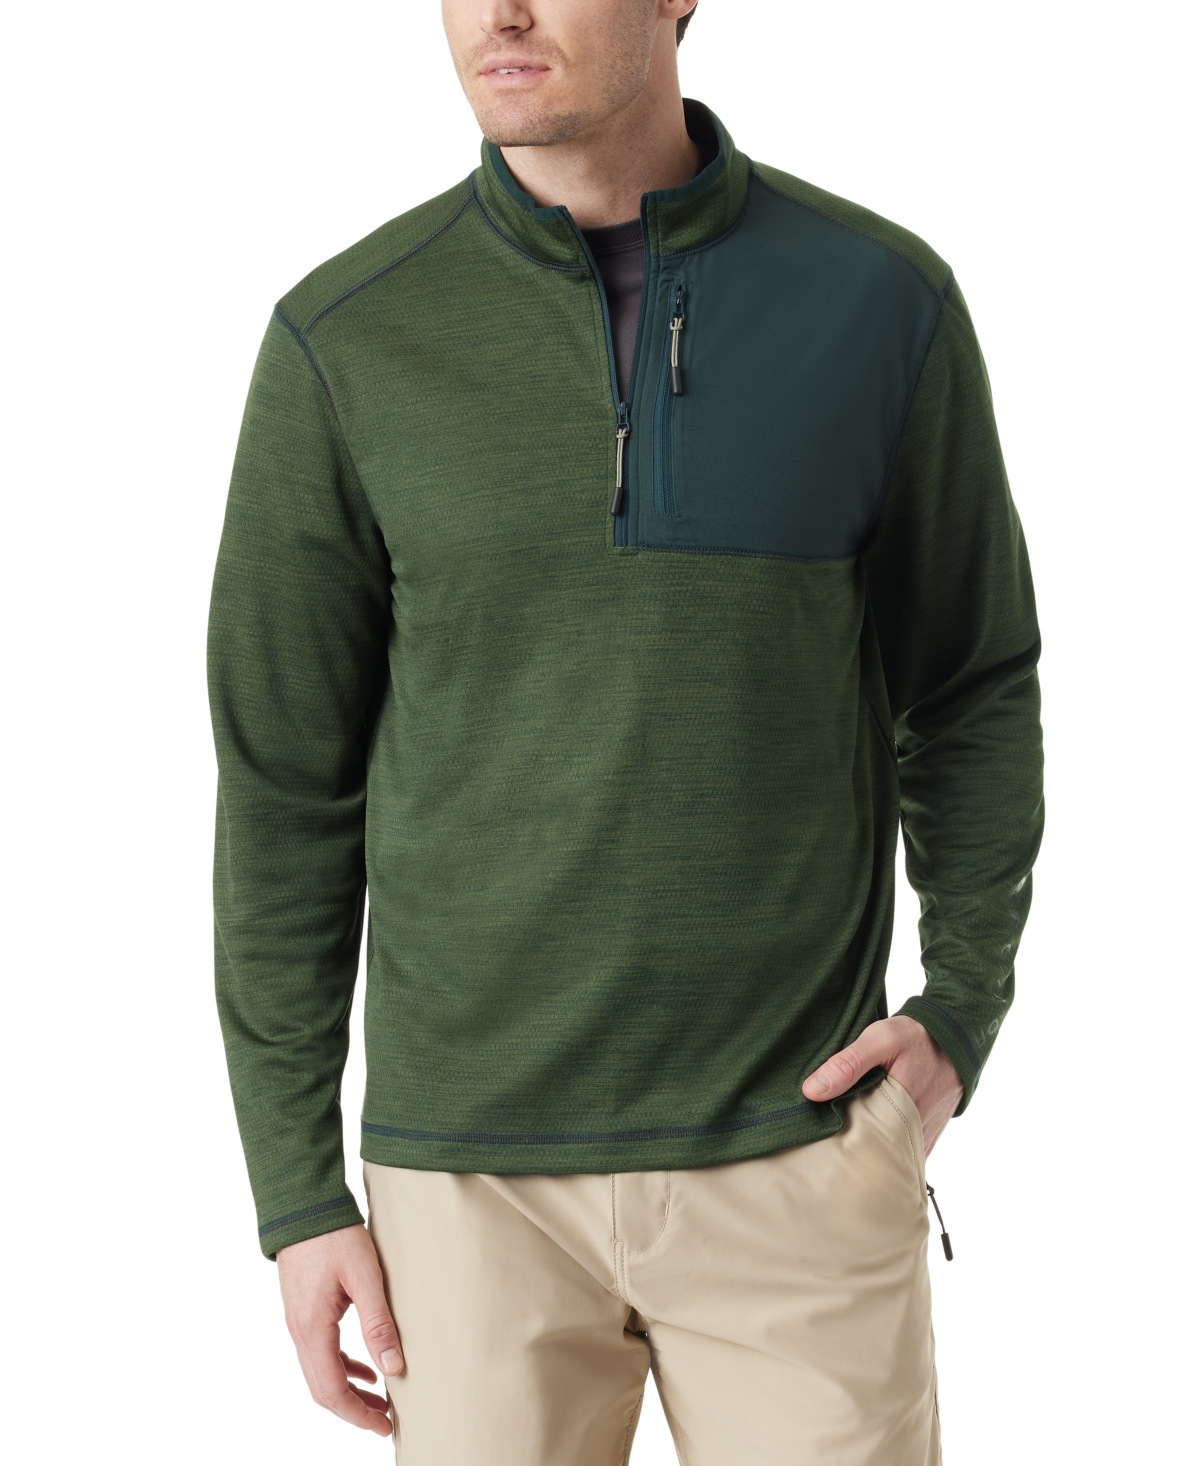 Men's Quarter-Zip Pullover - Forged Iron